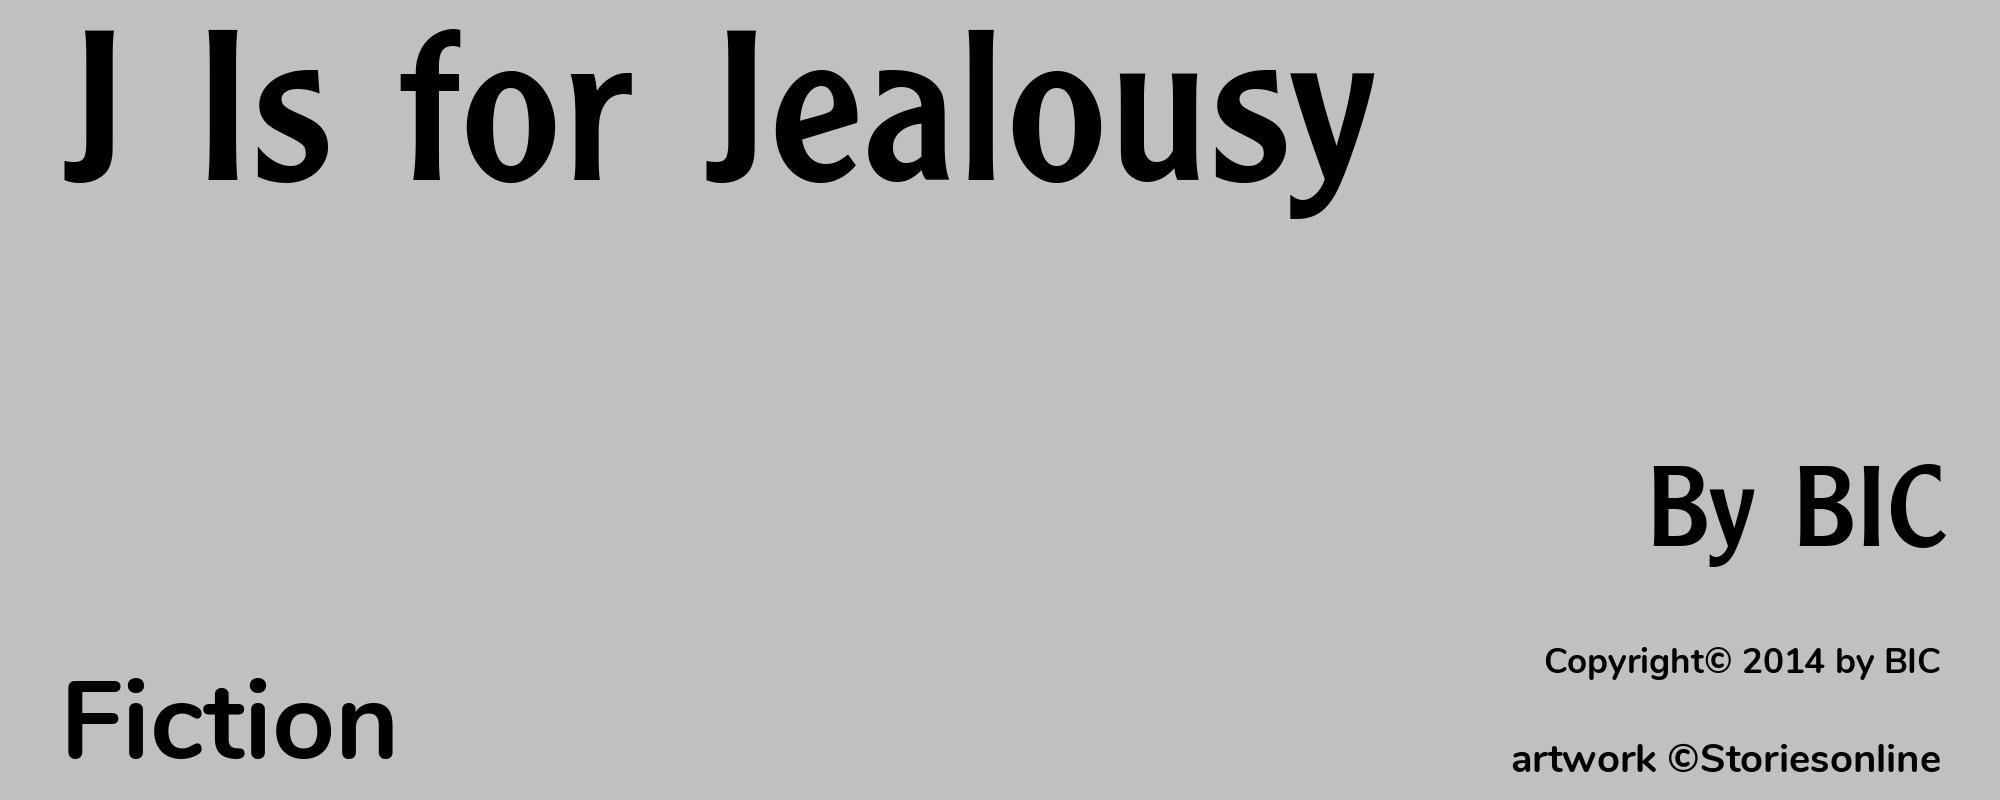 J Is for Jealousy - Cover